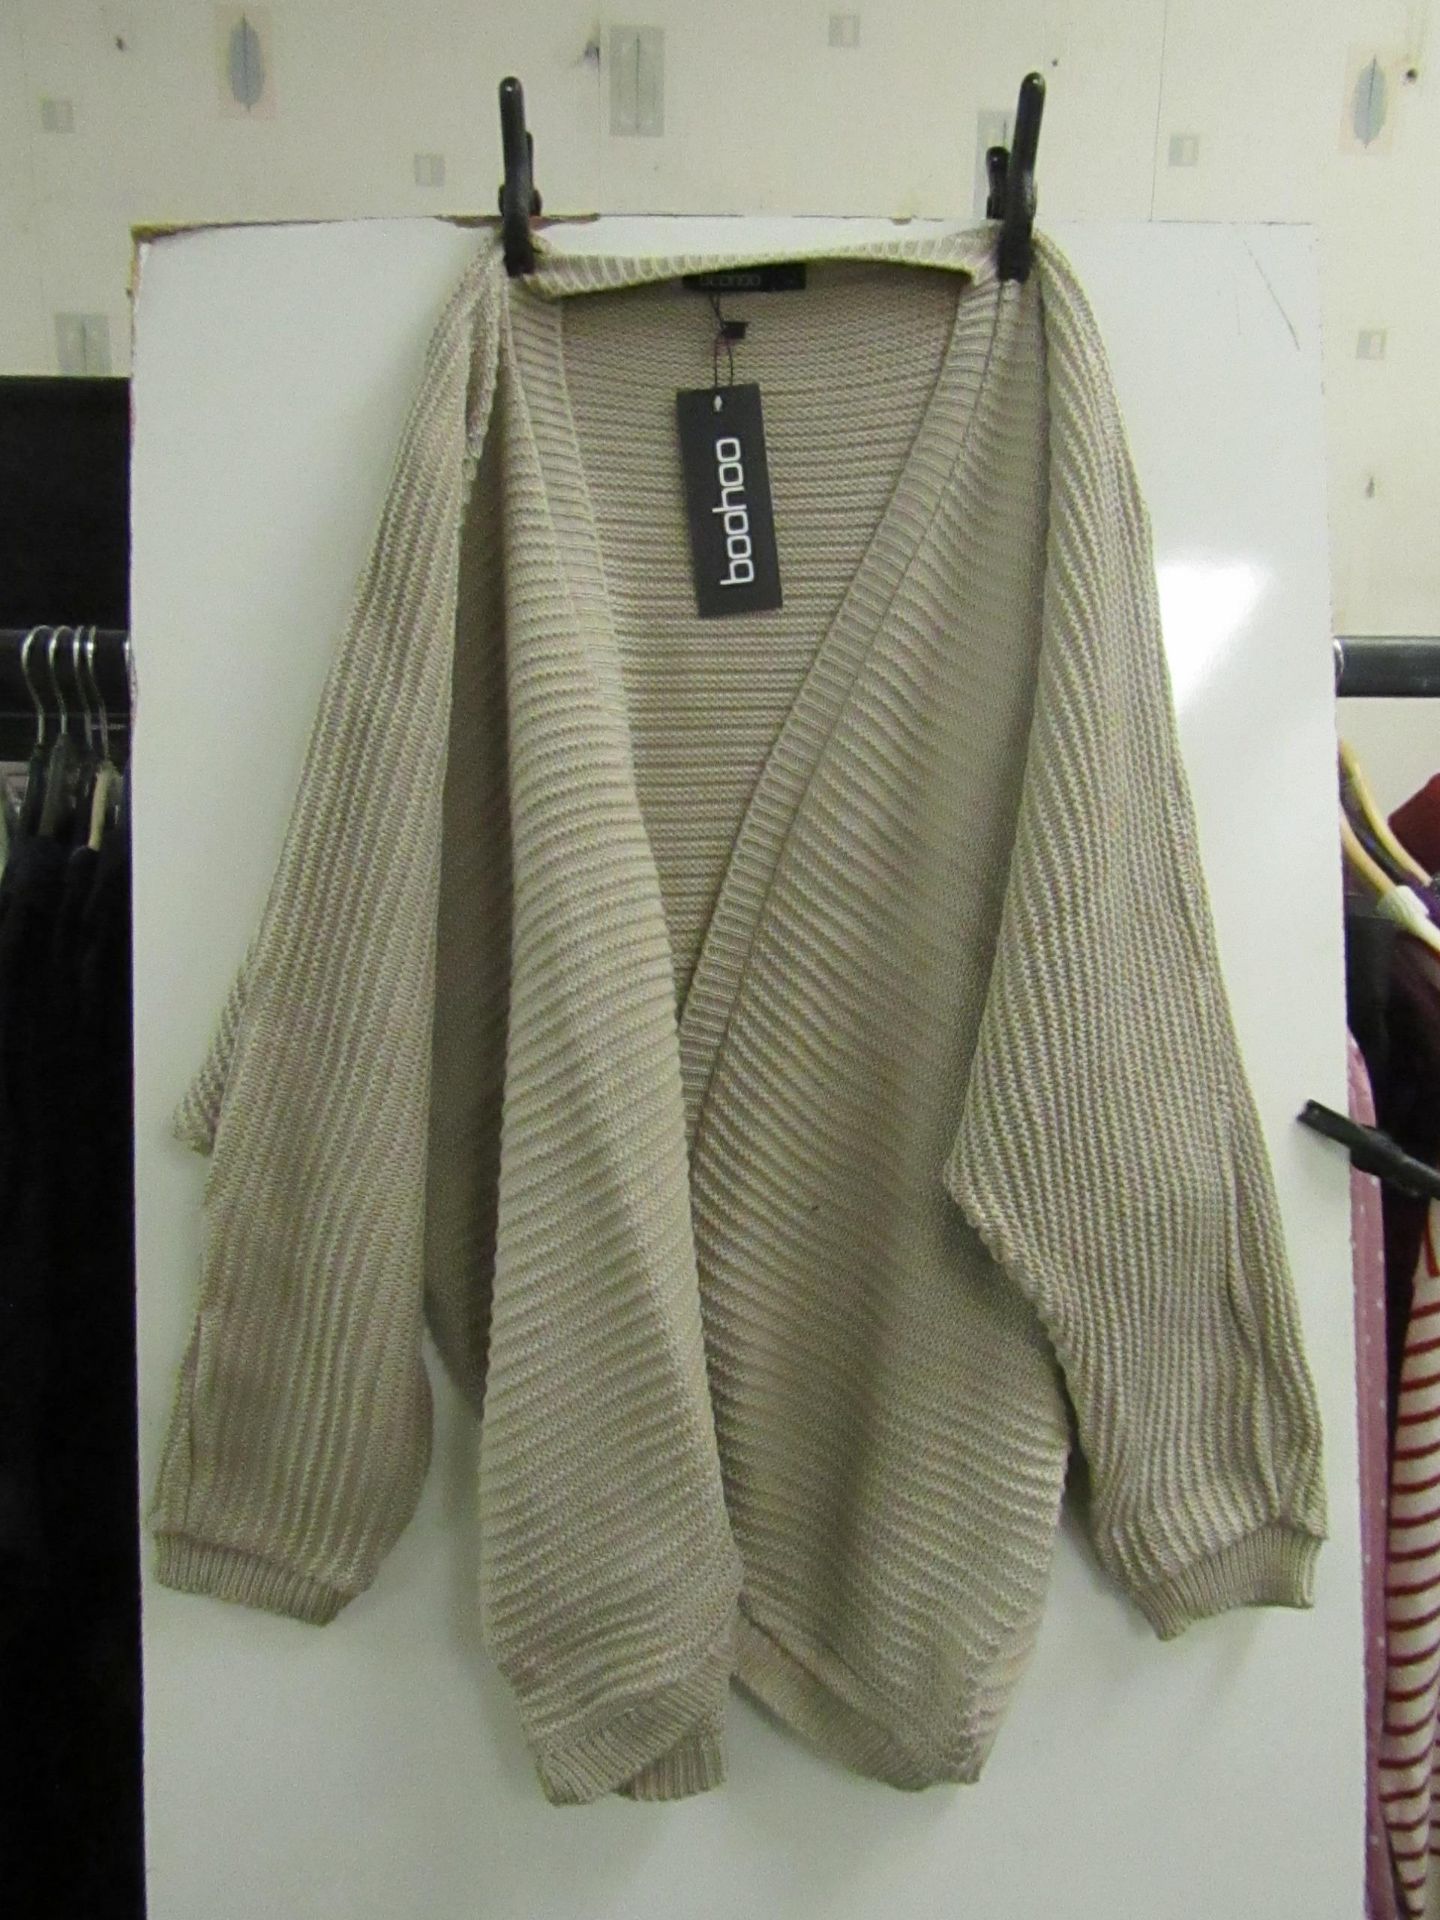 Boohoo ladies rebecca batwing cardigan, size L, new with tags.